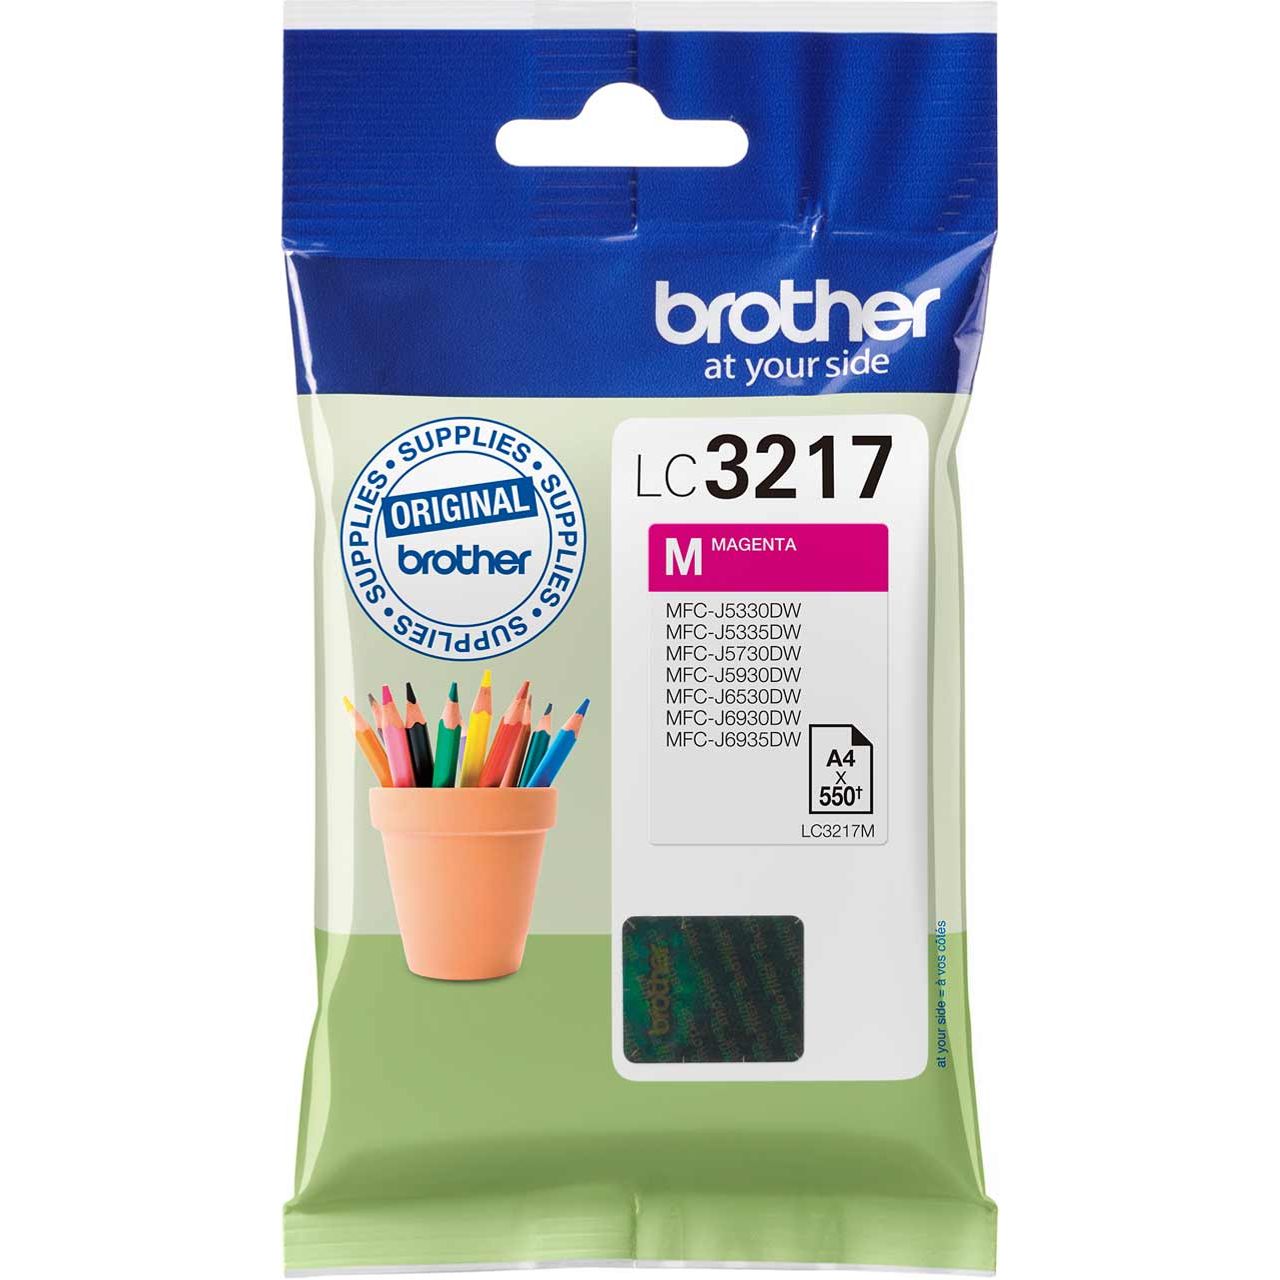 Brother LC3217M Magenta Ink Cartridge Review